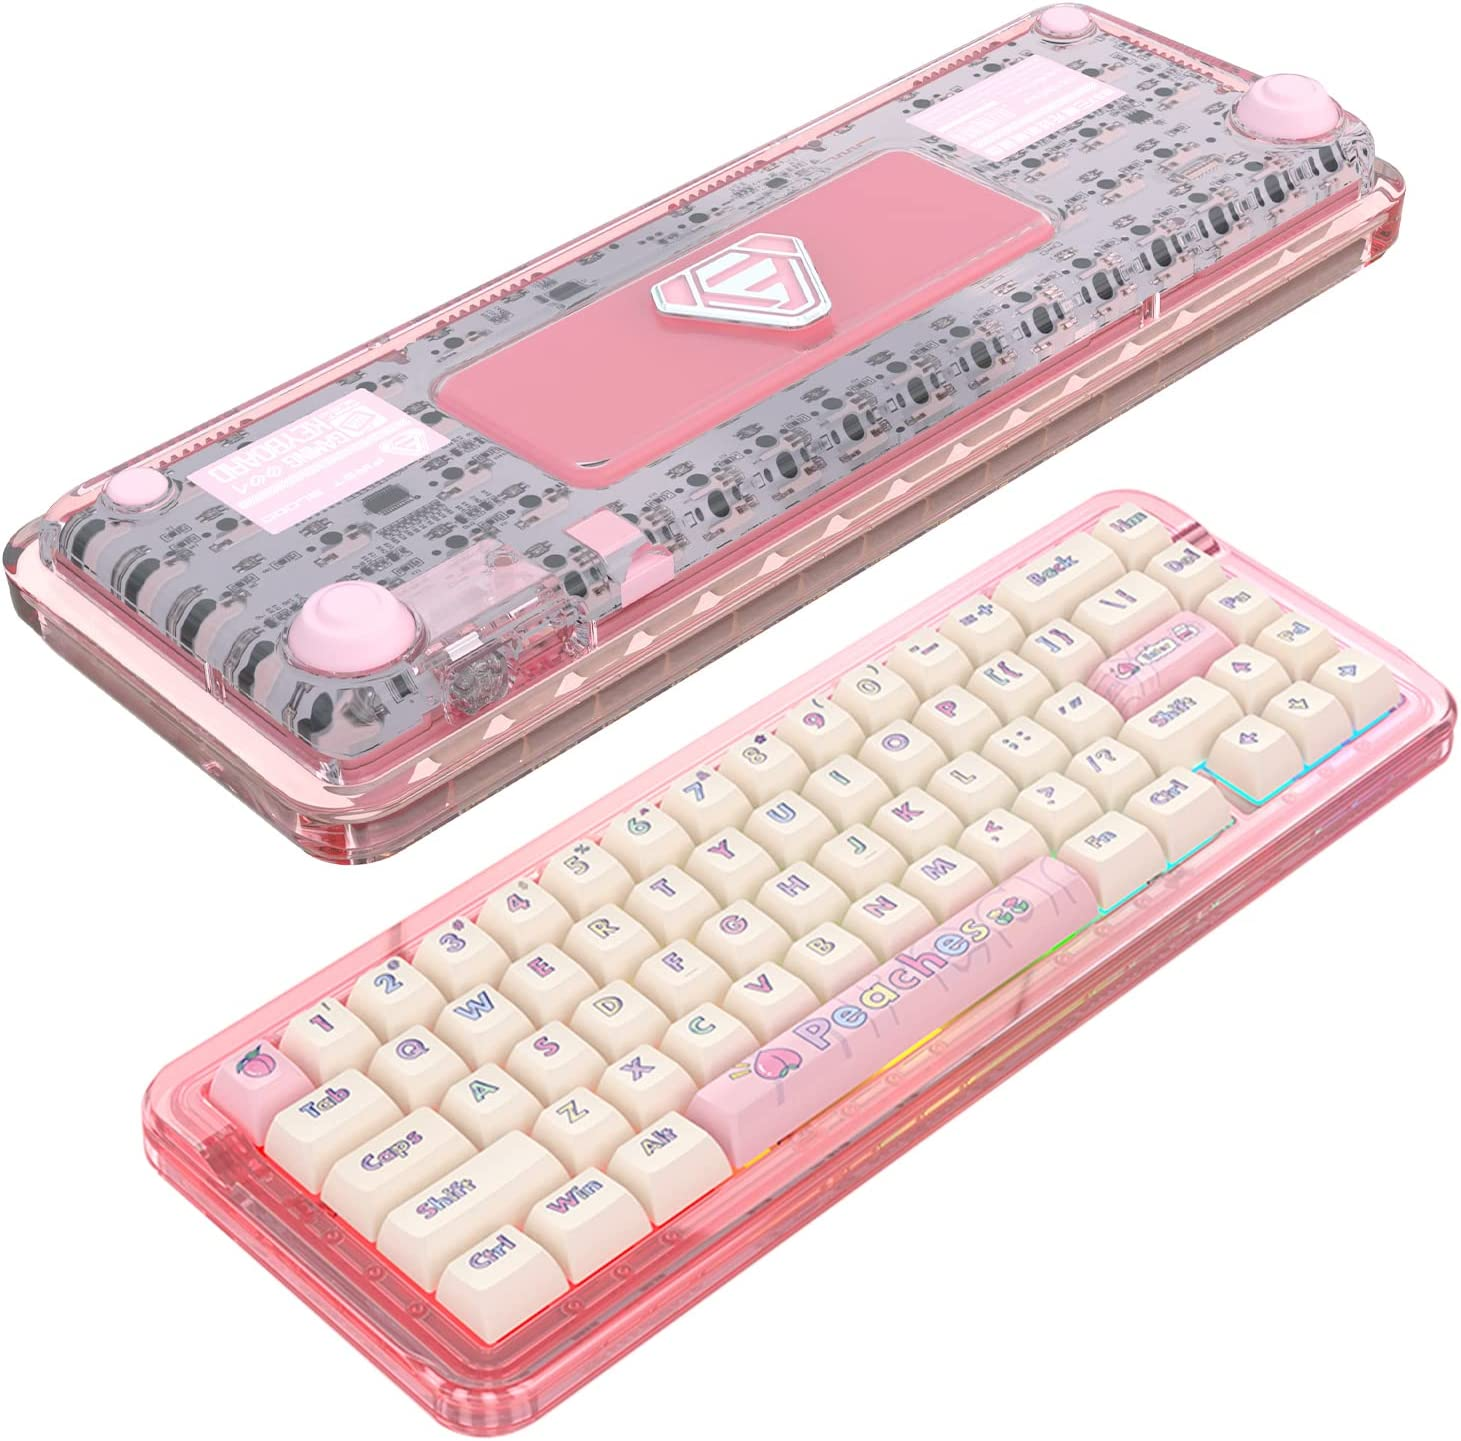 By customizing your gaming keyboard and case you will be creating a truly unique keyboard.